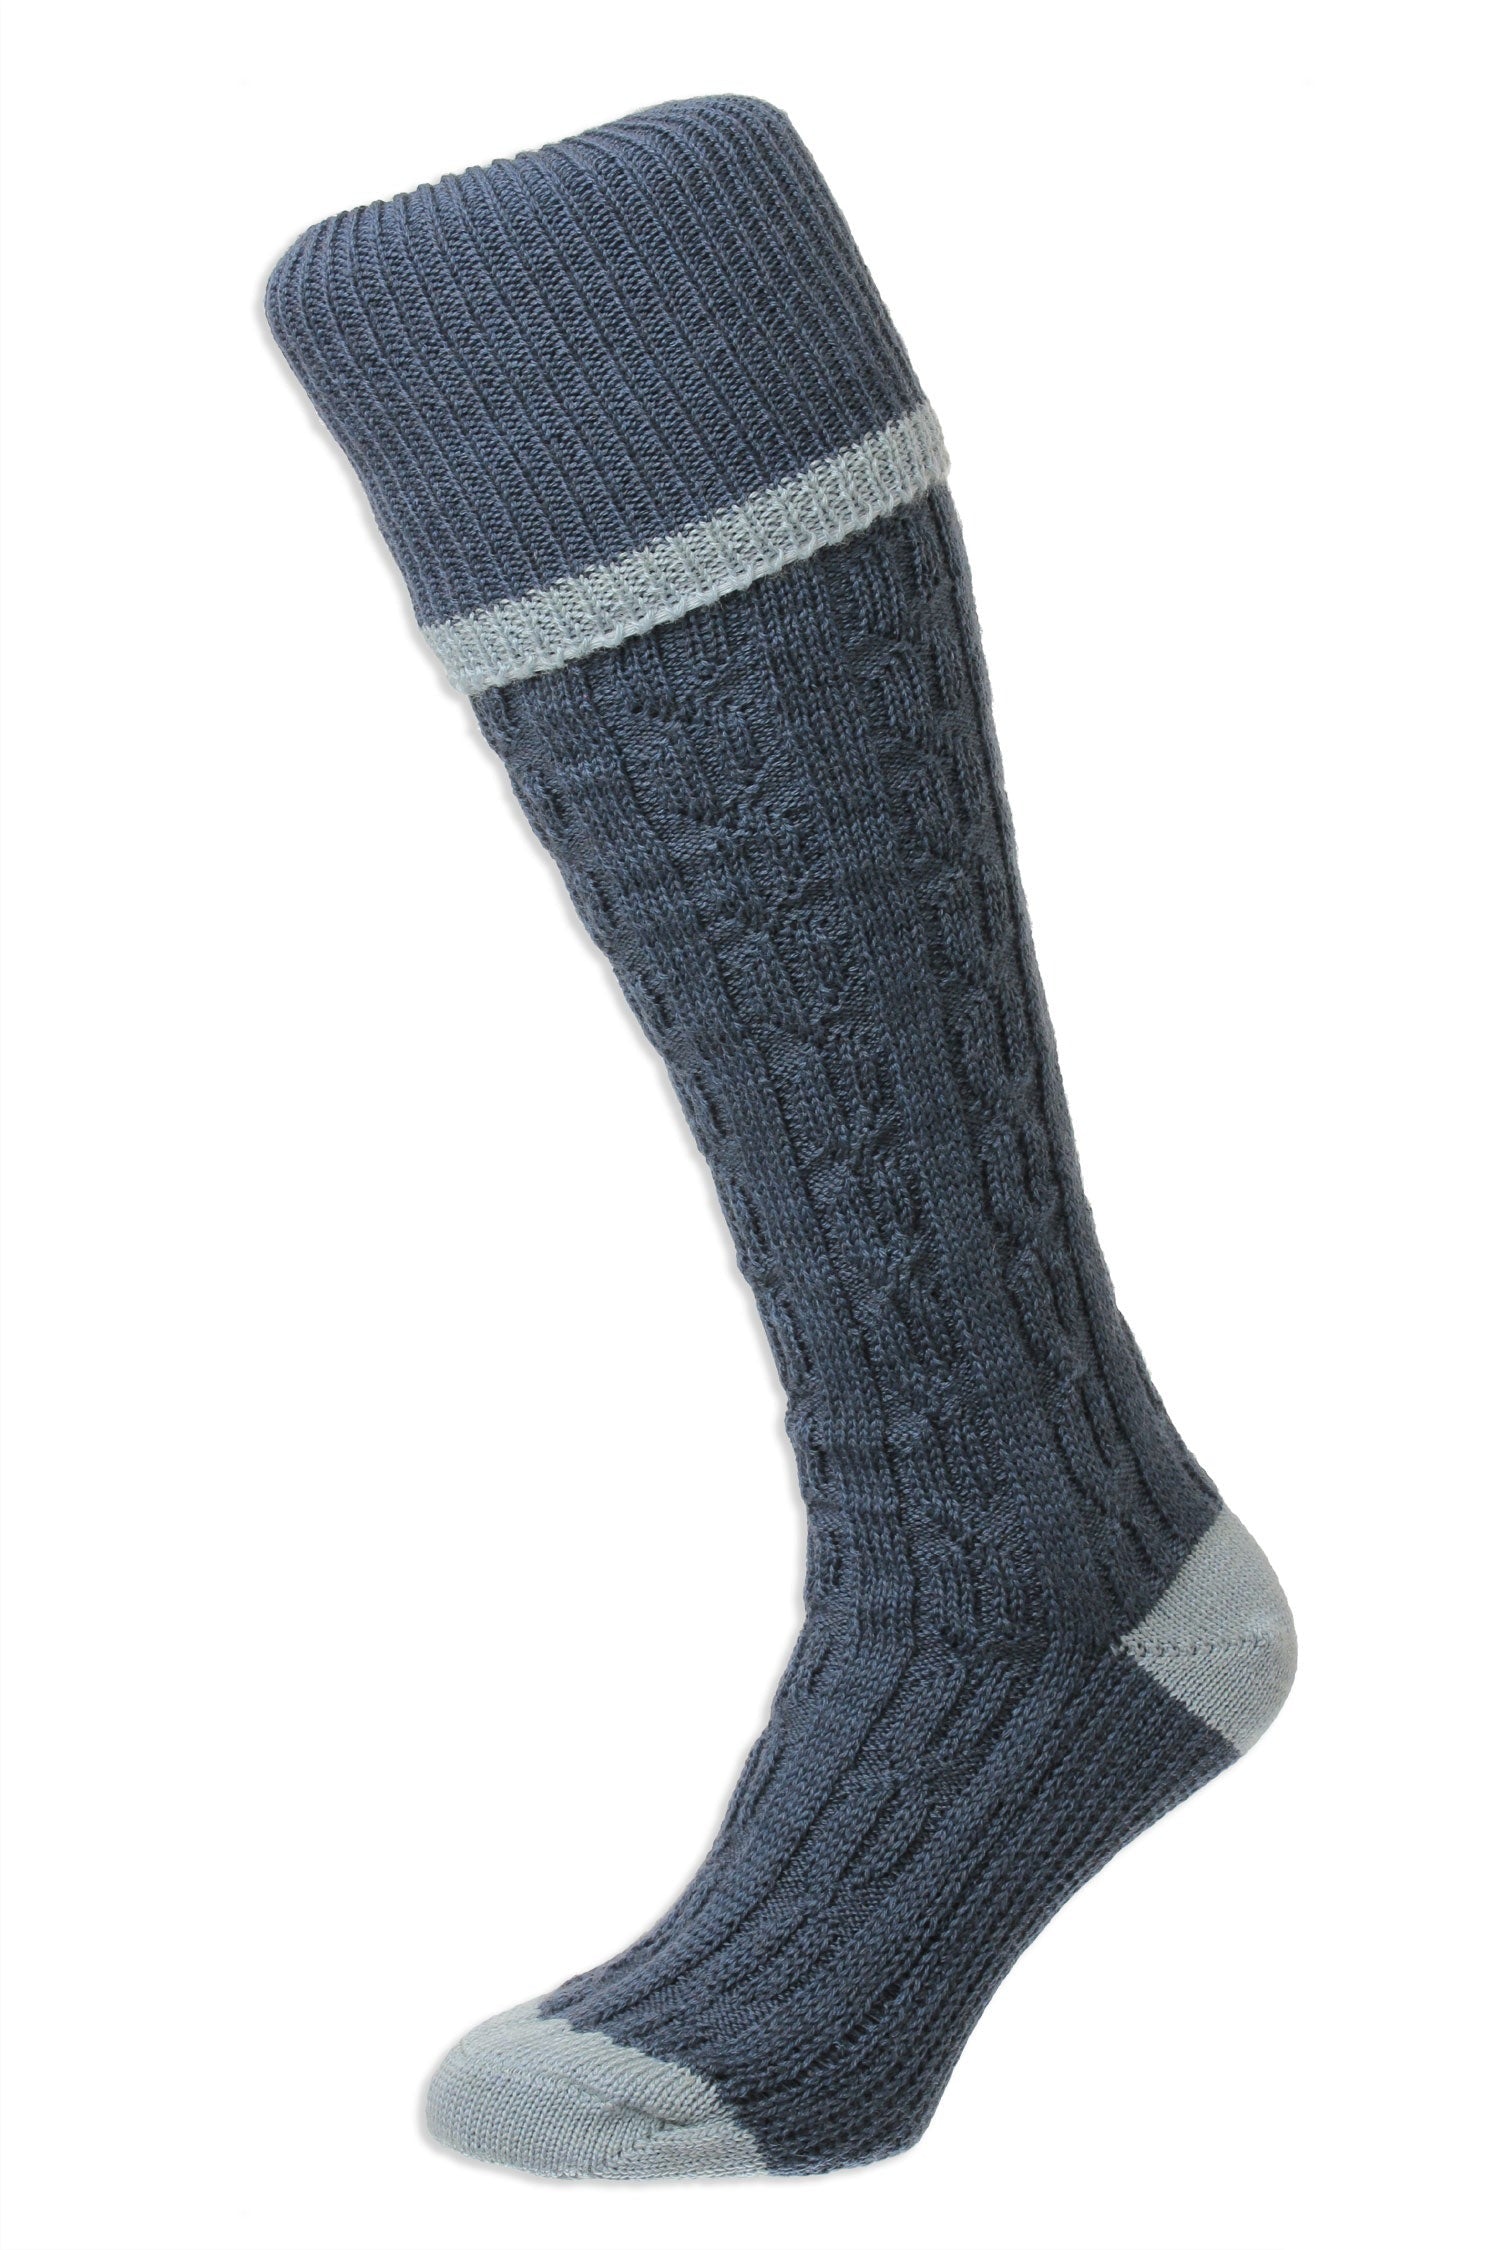 Denim Premium quality cable knee socks with turn over tops featuring at contrast colour at the toe, heel and top. 